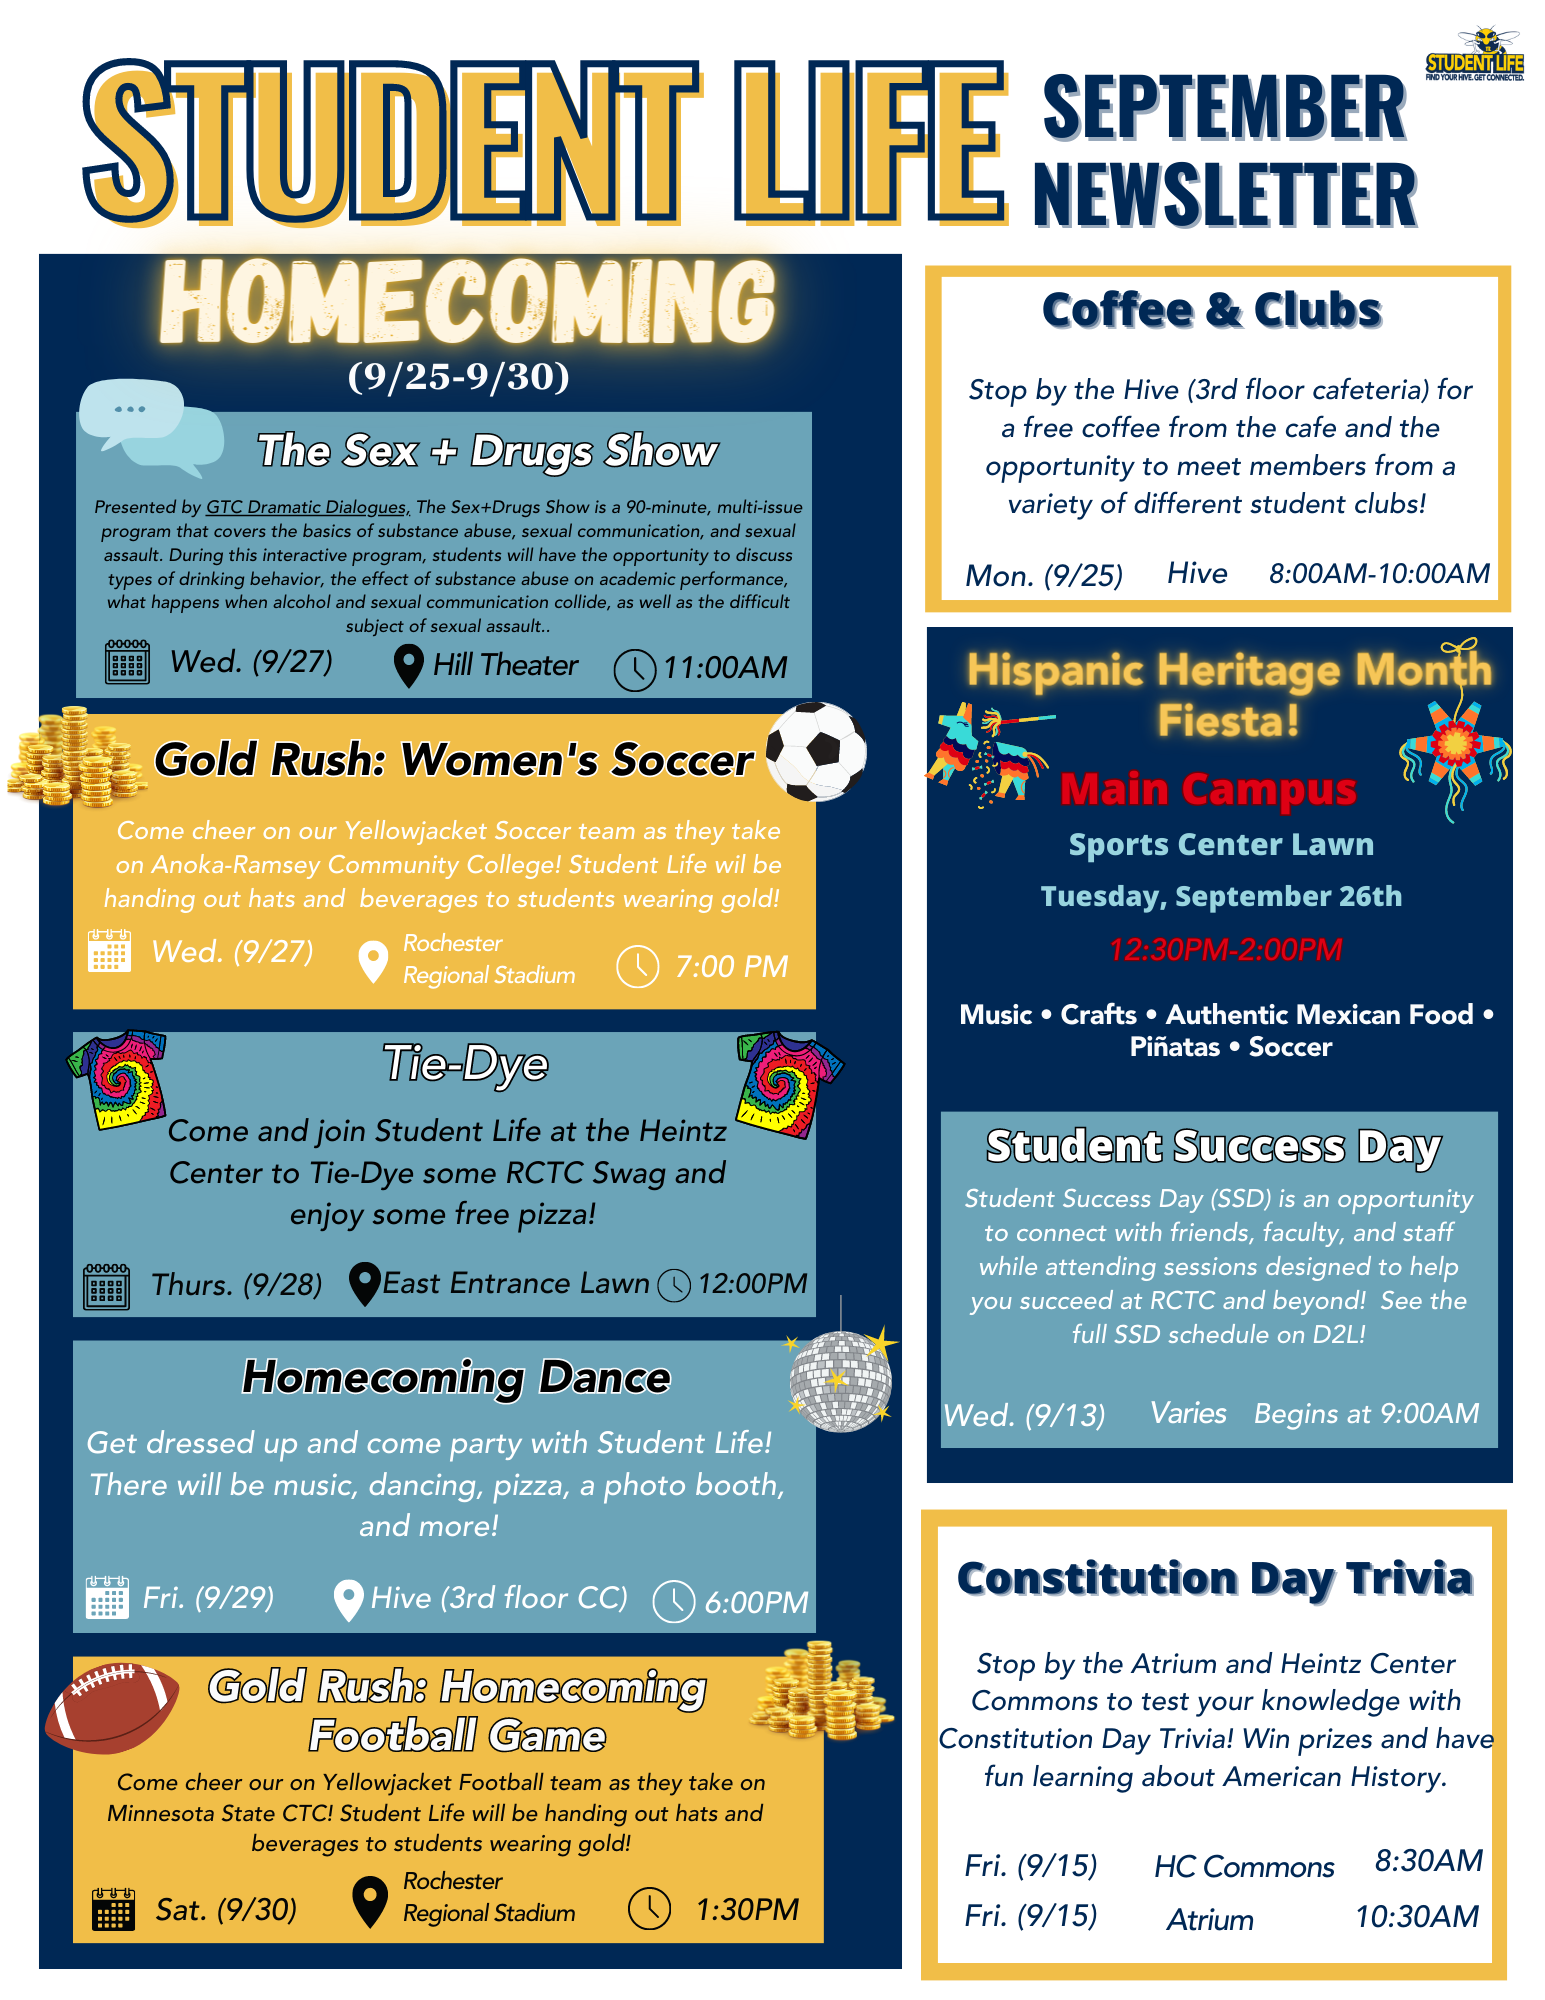 Student Success Day: Wednesday, September 13th Constitution Day Trivia: Friday, September 15th Coffee & Clubs: Monday, September 25th (Homecoming week) Hispanic Heritage Month Fiesta: Tuesday, September 26th (Homecoming week) The Sex + Drugs Show: Wednesday, September 27th (Homecoming week) Gold Rush: Women's Soccer: Wednesday, September 27th (Homecoming week) Tie Dye at Heintz Center: Thursday, September 28th (Homecoming week) Homecoming dance: Friday, September 29th (Homecoming week) Gold Rush: Homecoming football game 